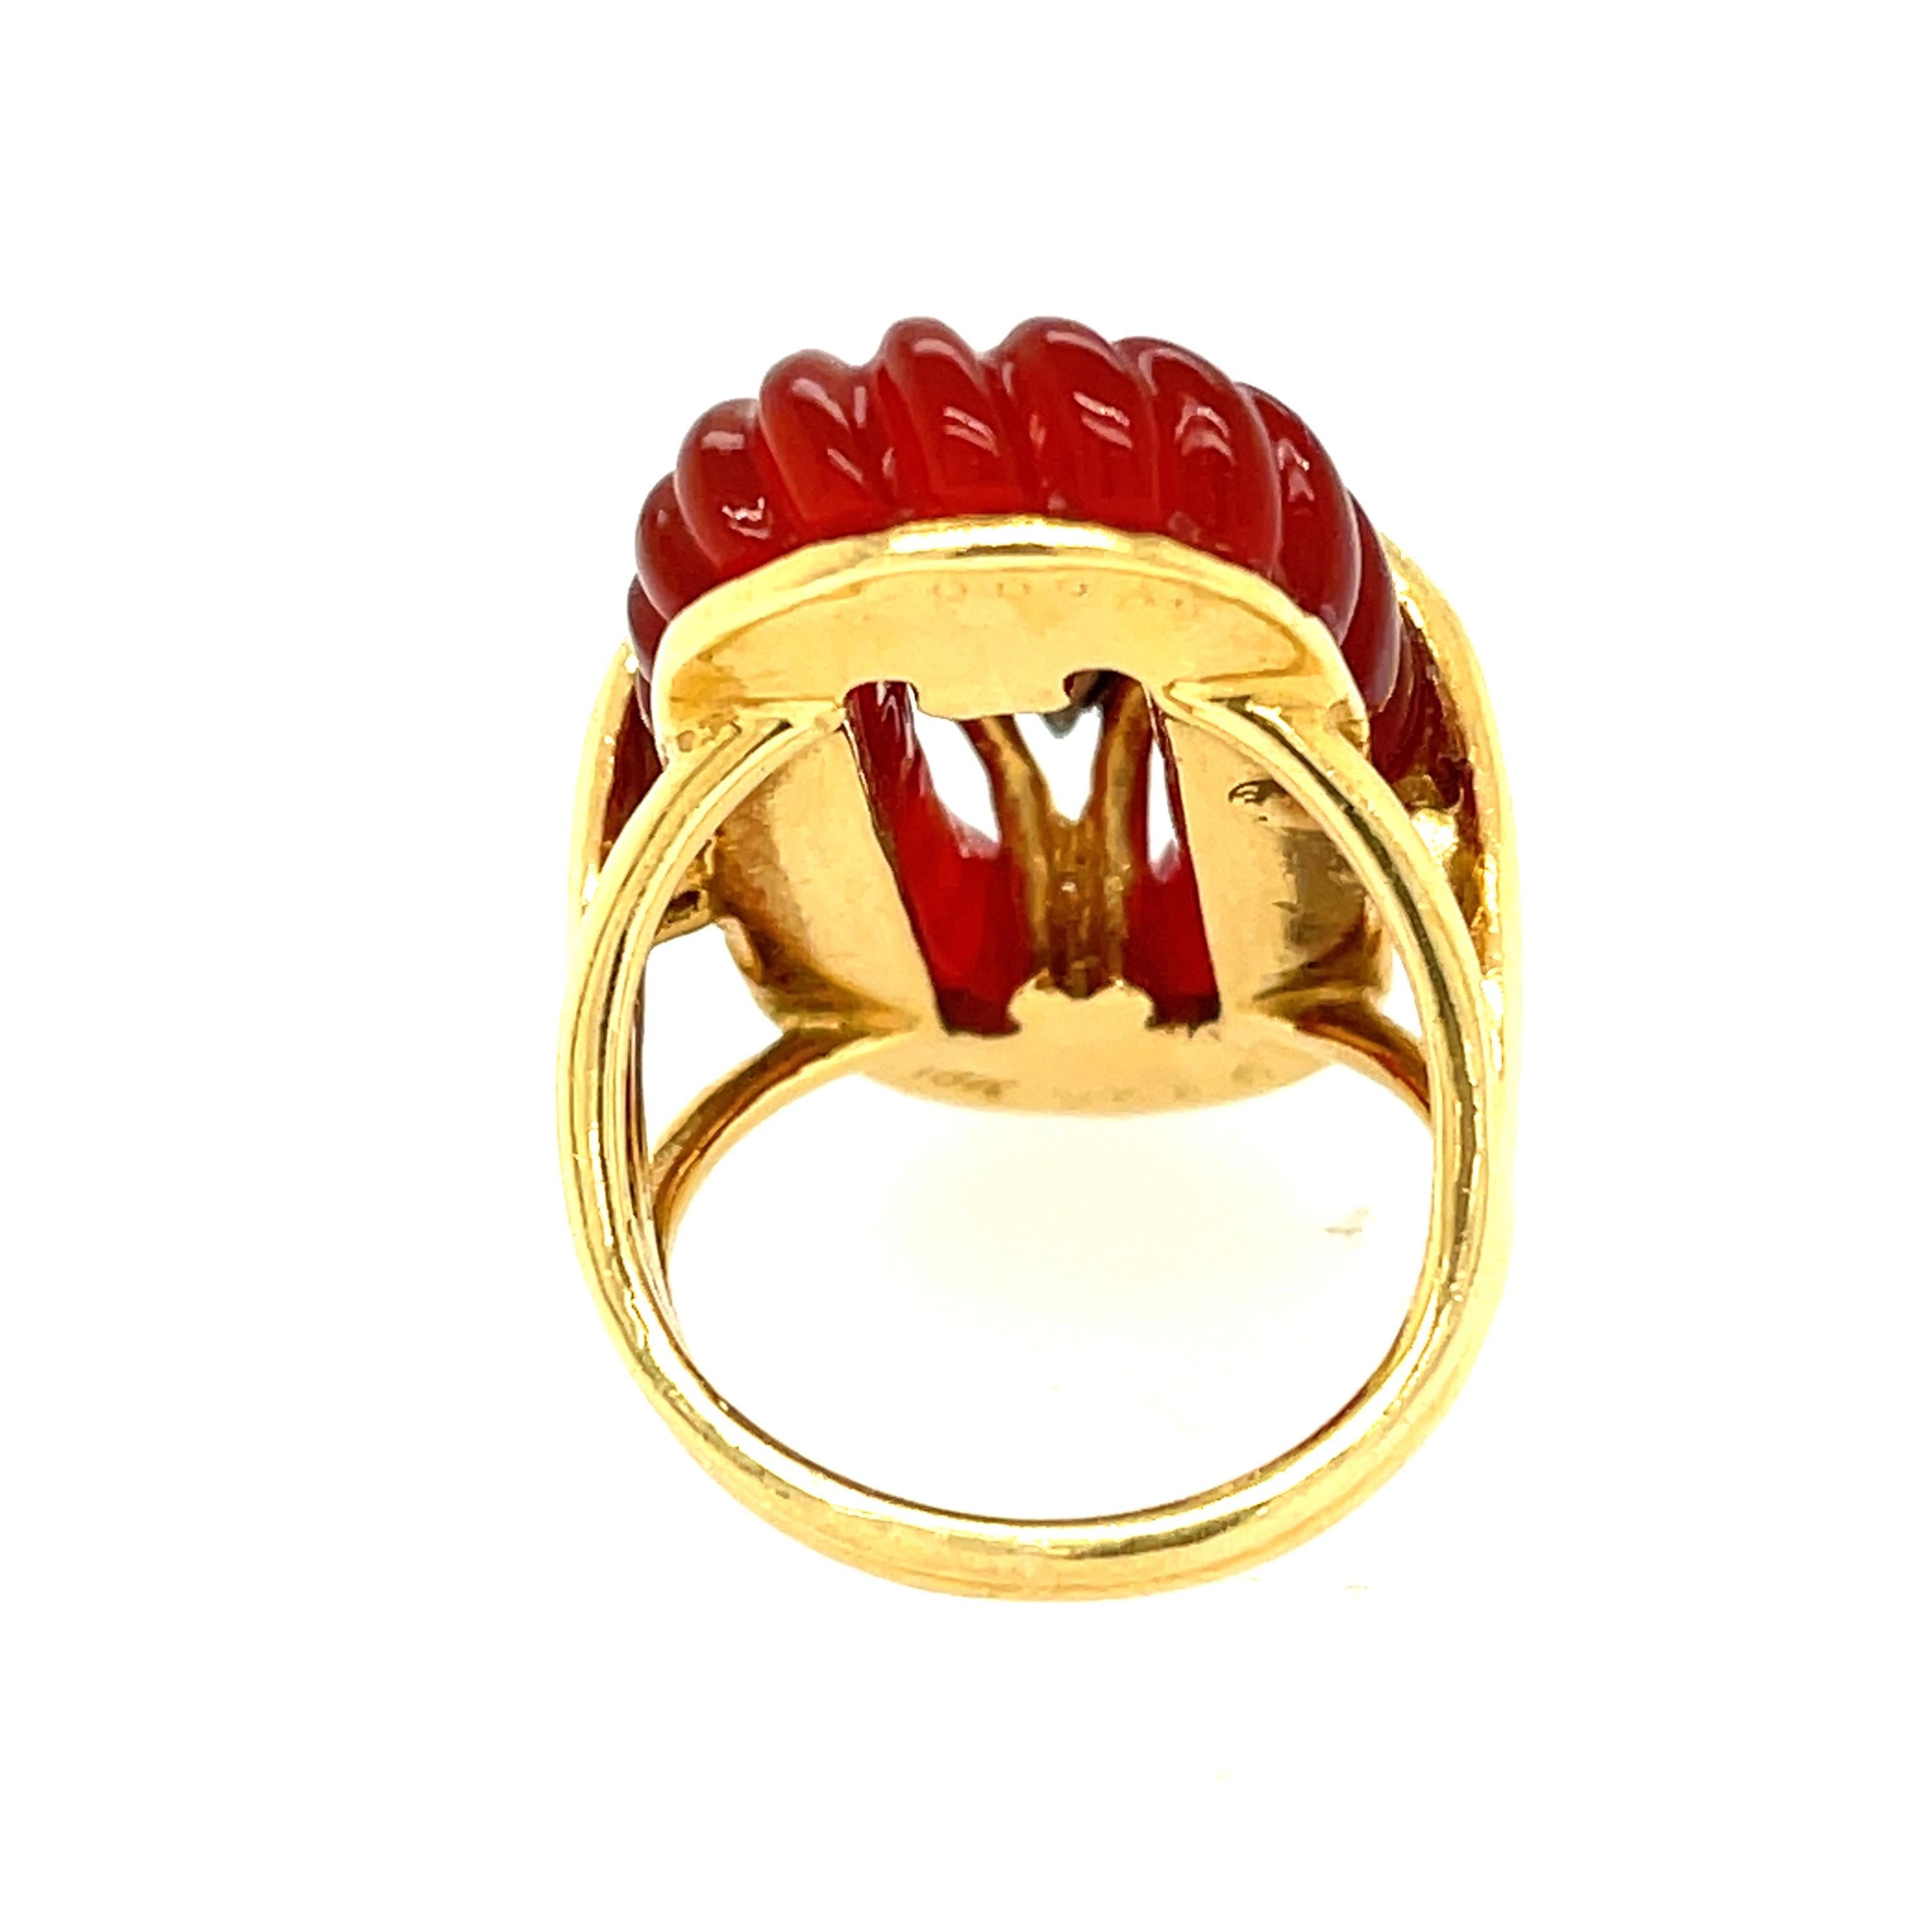 A vintage 18k yellow gold pave diamond and fluted carnelian cocktail ring by Van Cleef & Arpels, circa 1970. This colorful oval shaped ring features an oval of fluted carnelian set with diamonds in the center. There are 16 round brilliant diamonds